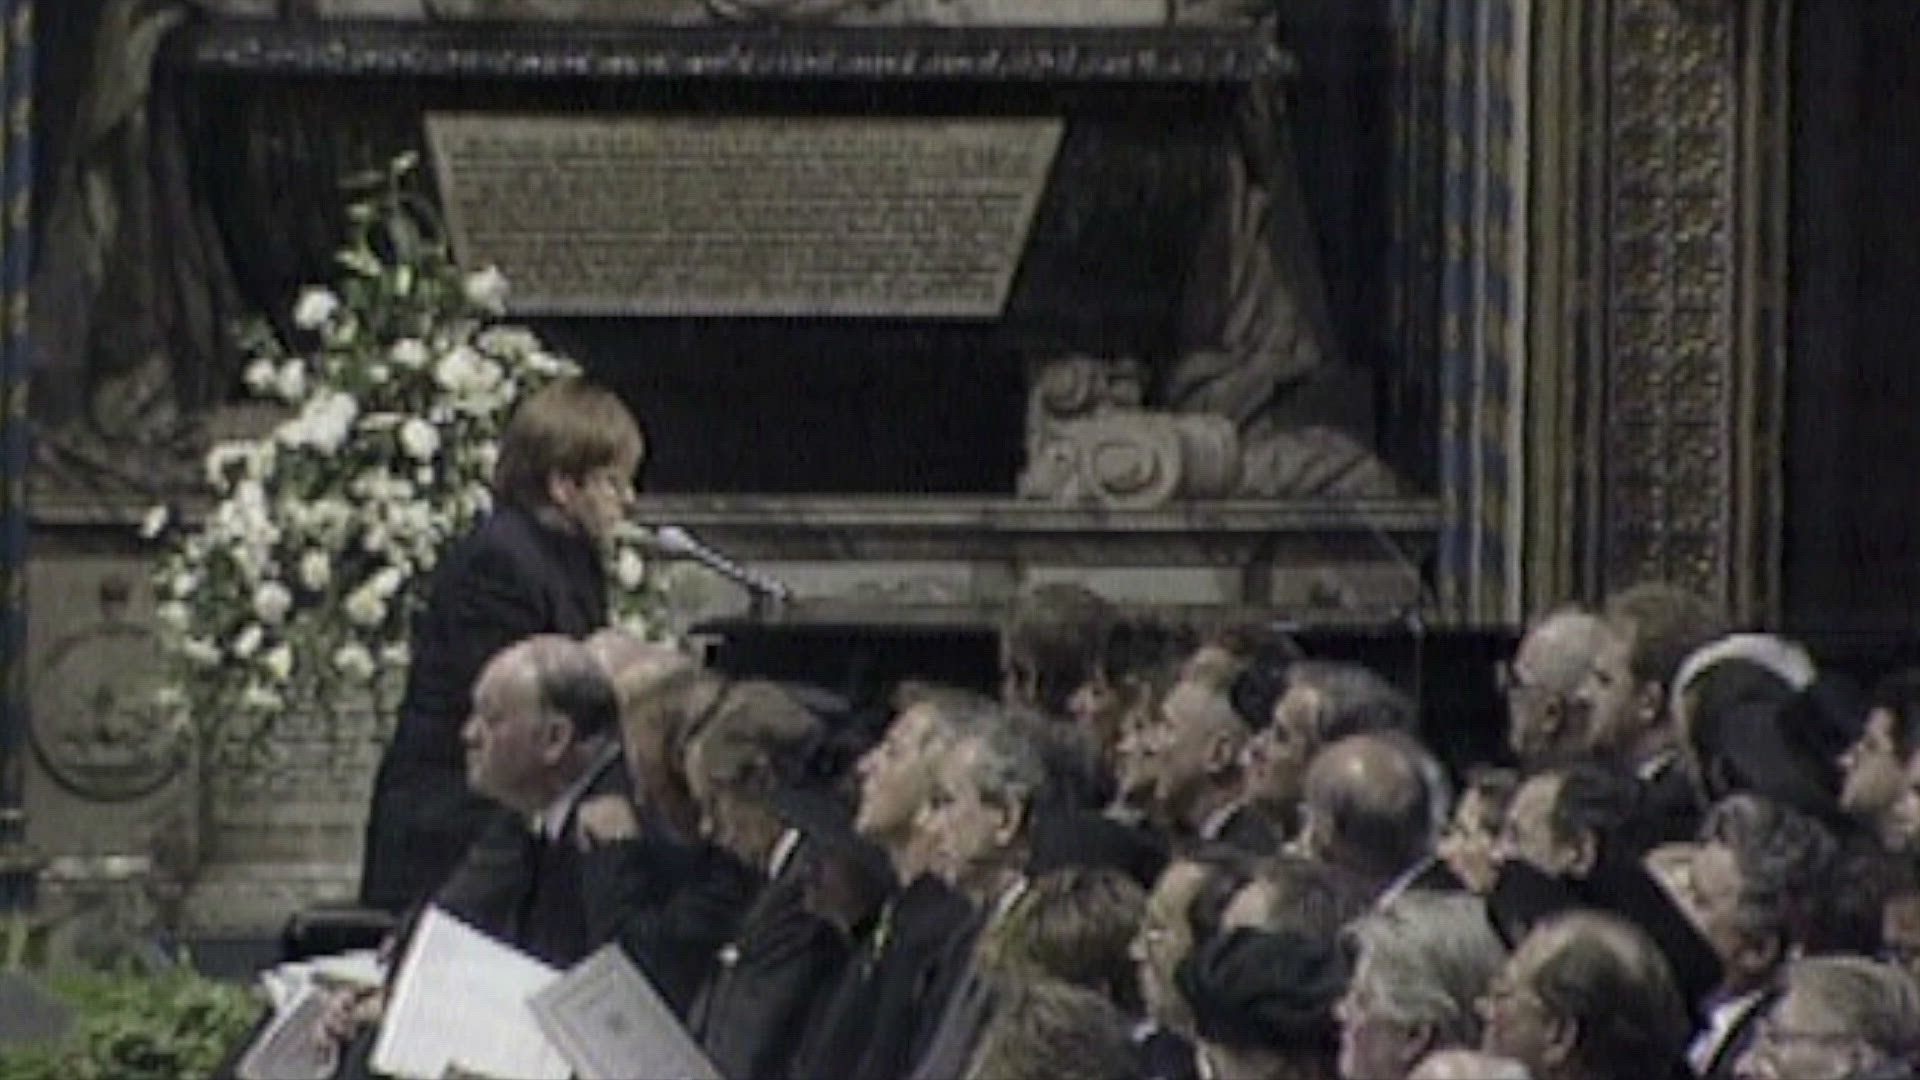 Elton John famously sang 'Goodbye England's Rose' at her funeral, but the song almost didn't happen. Buzz60's Keri Lumm reports.